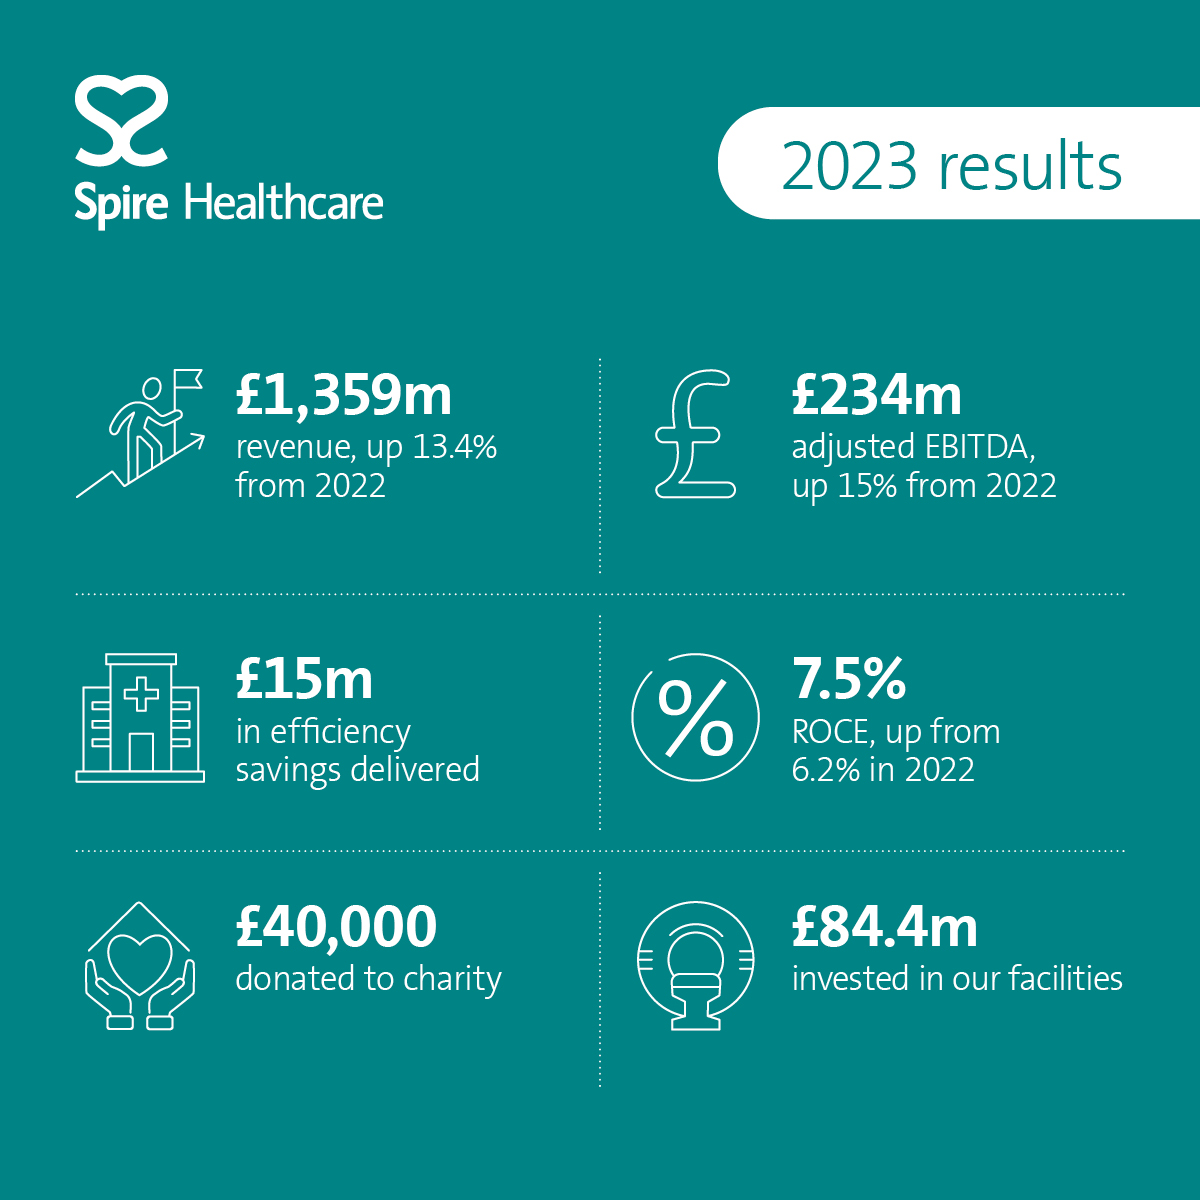 Today we have released our annual report for 2023. Some of our 2023 highlights featured in the report include: 💛 £40,000 donated to charity 🏥 £84.4m invested in our facilities ✅ £15m in efficiency savings delivered Read more ➡️ spkl.io/601440FrI #SpireHealthcare